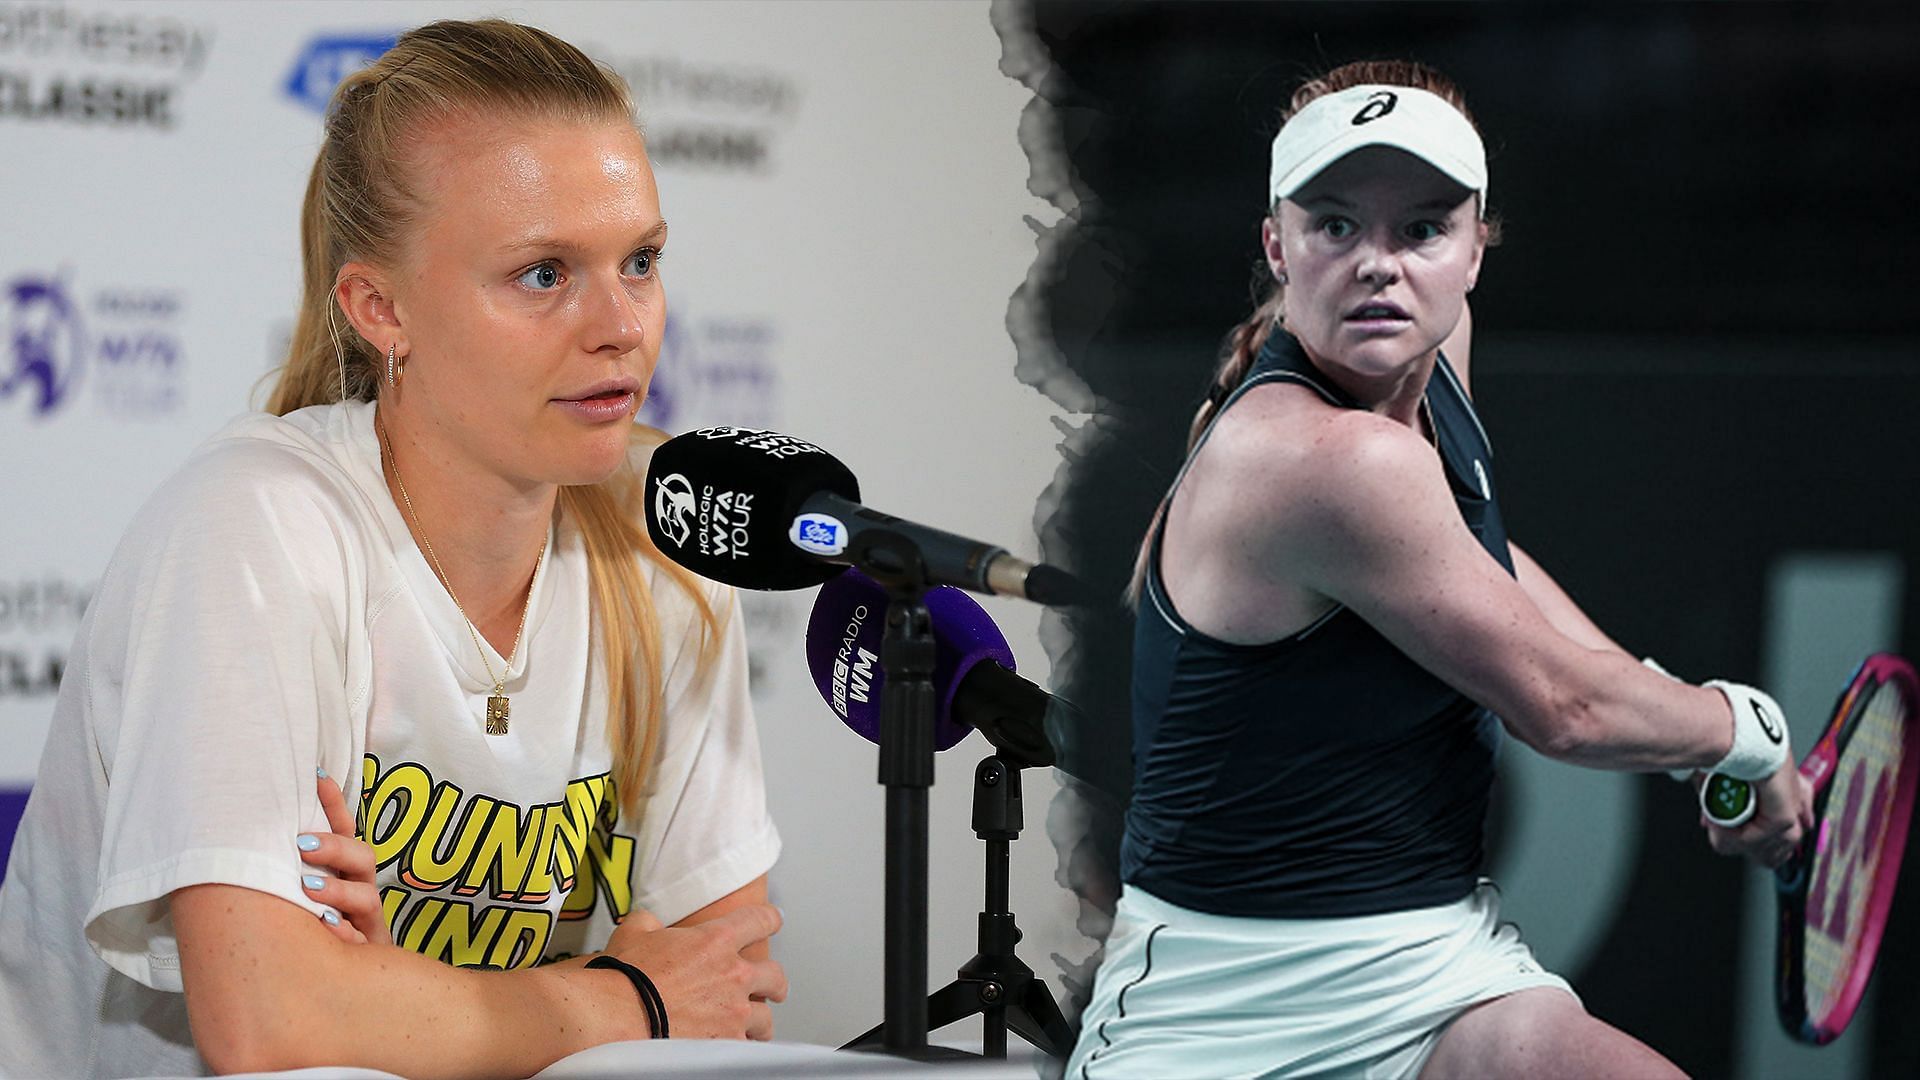 Harriet Dart condemns the online abuse directed at her